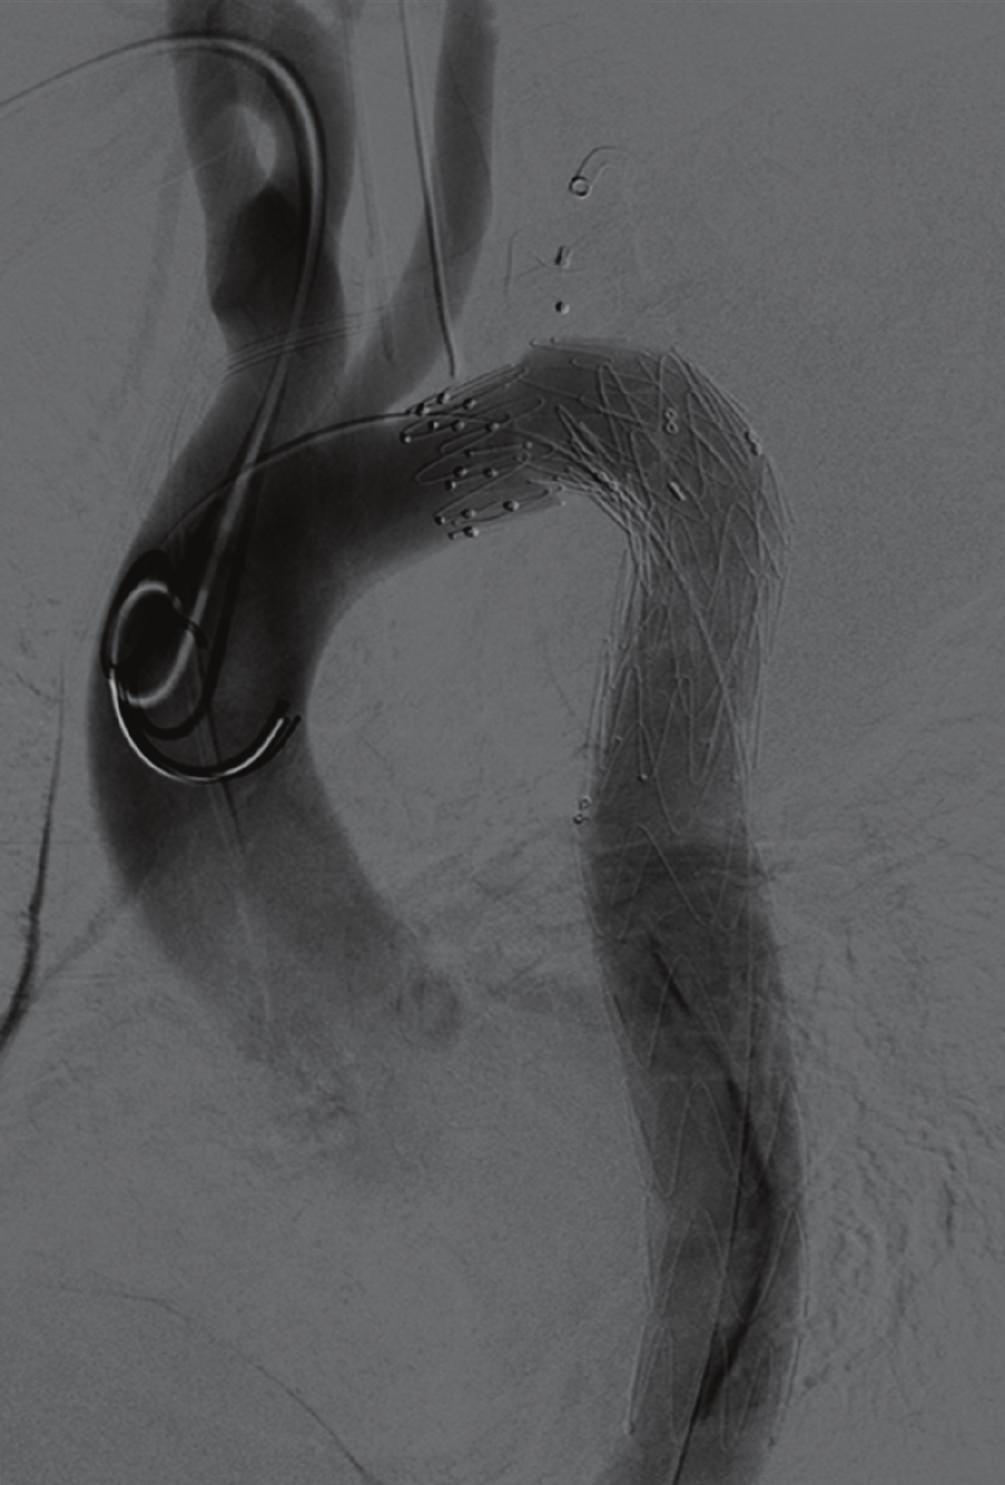 Final angiography after stent placement and embolization of the left subclavian artery demonstrates complete exclusion of the